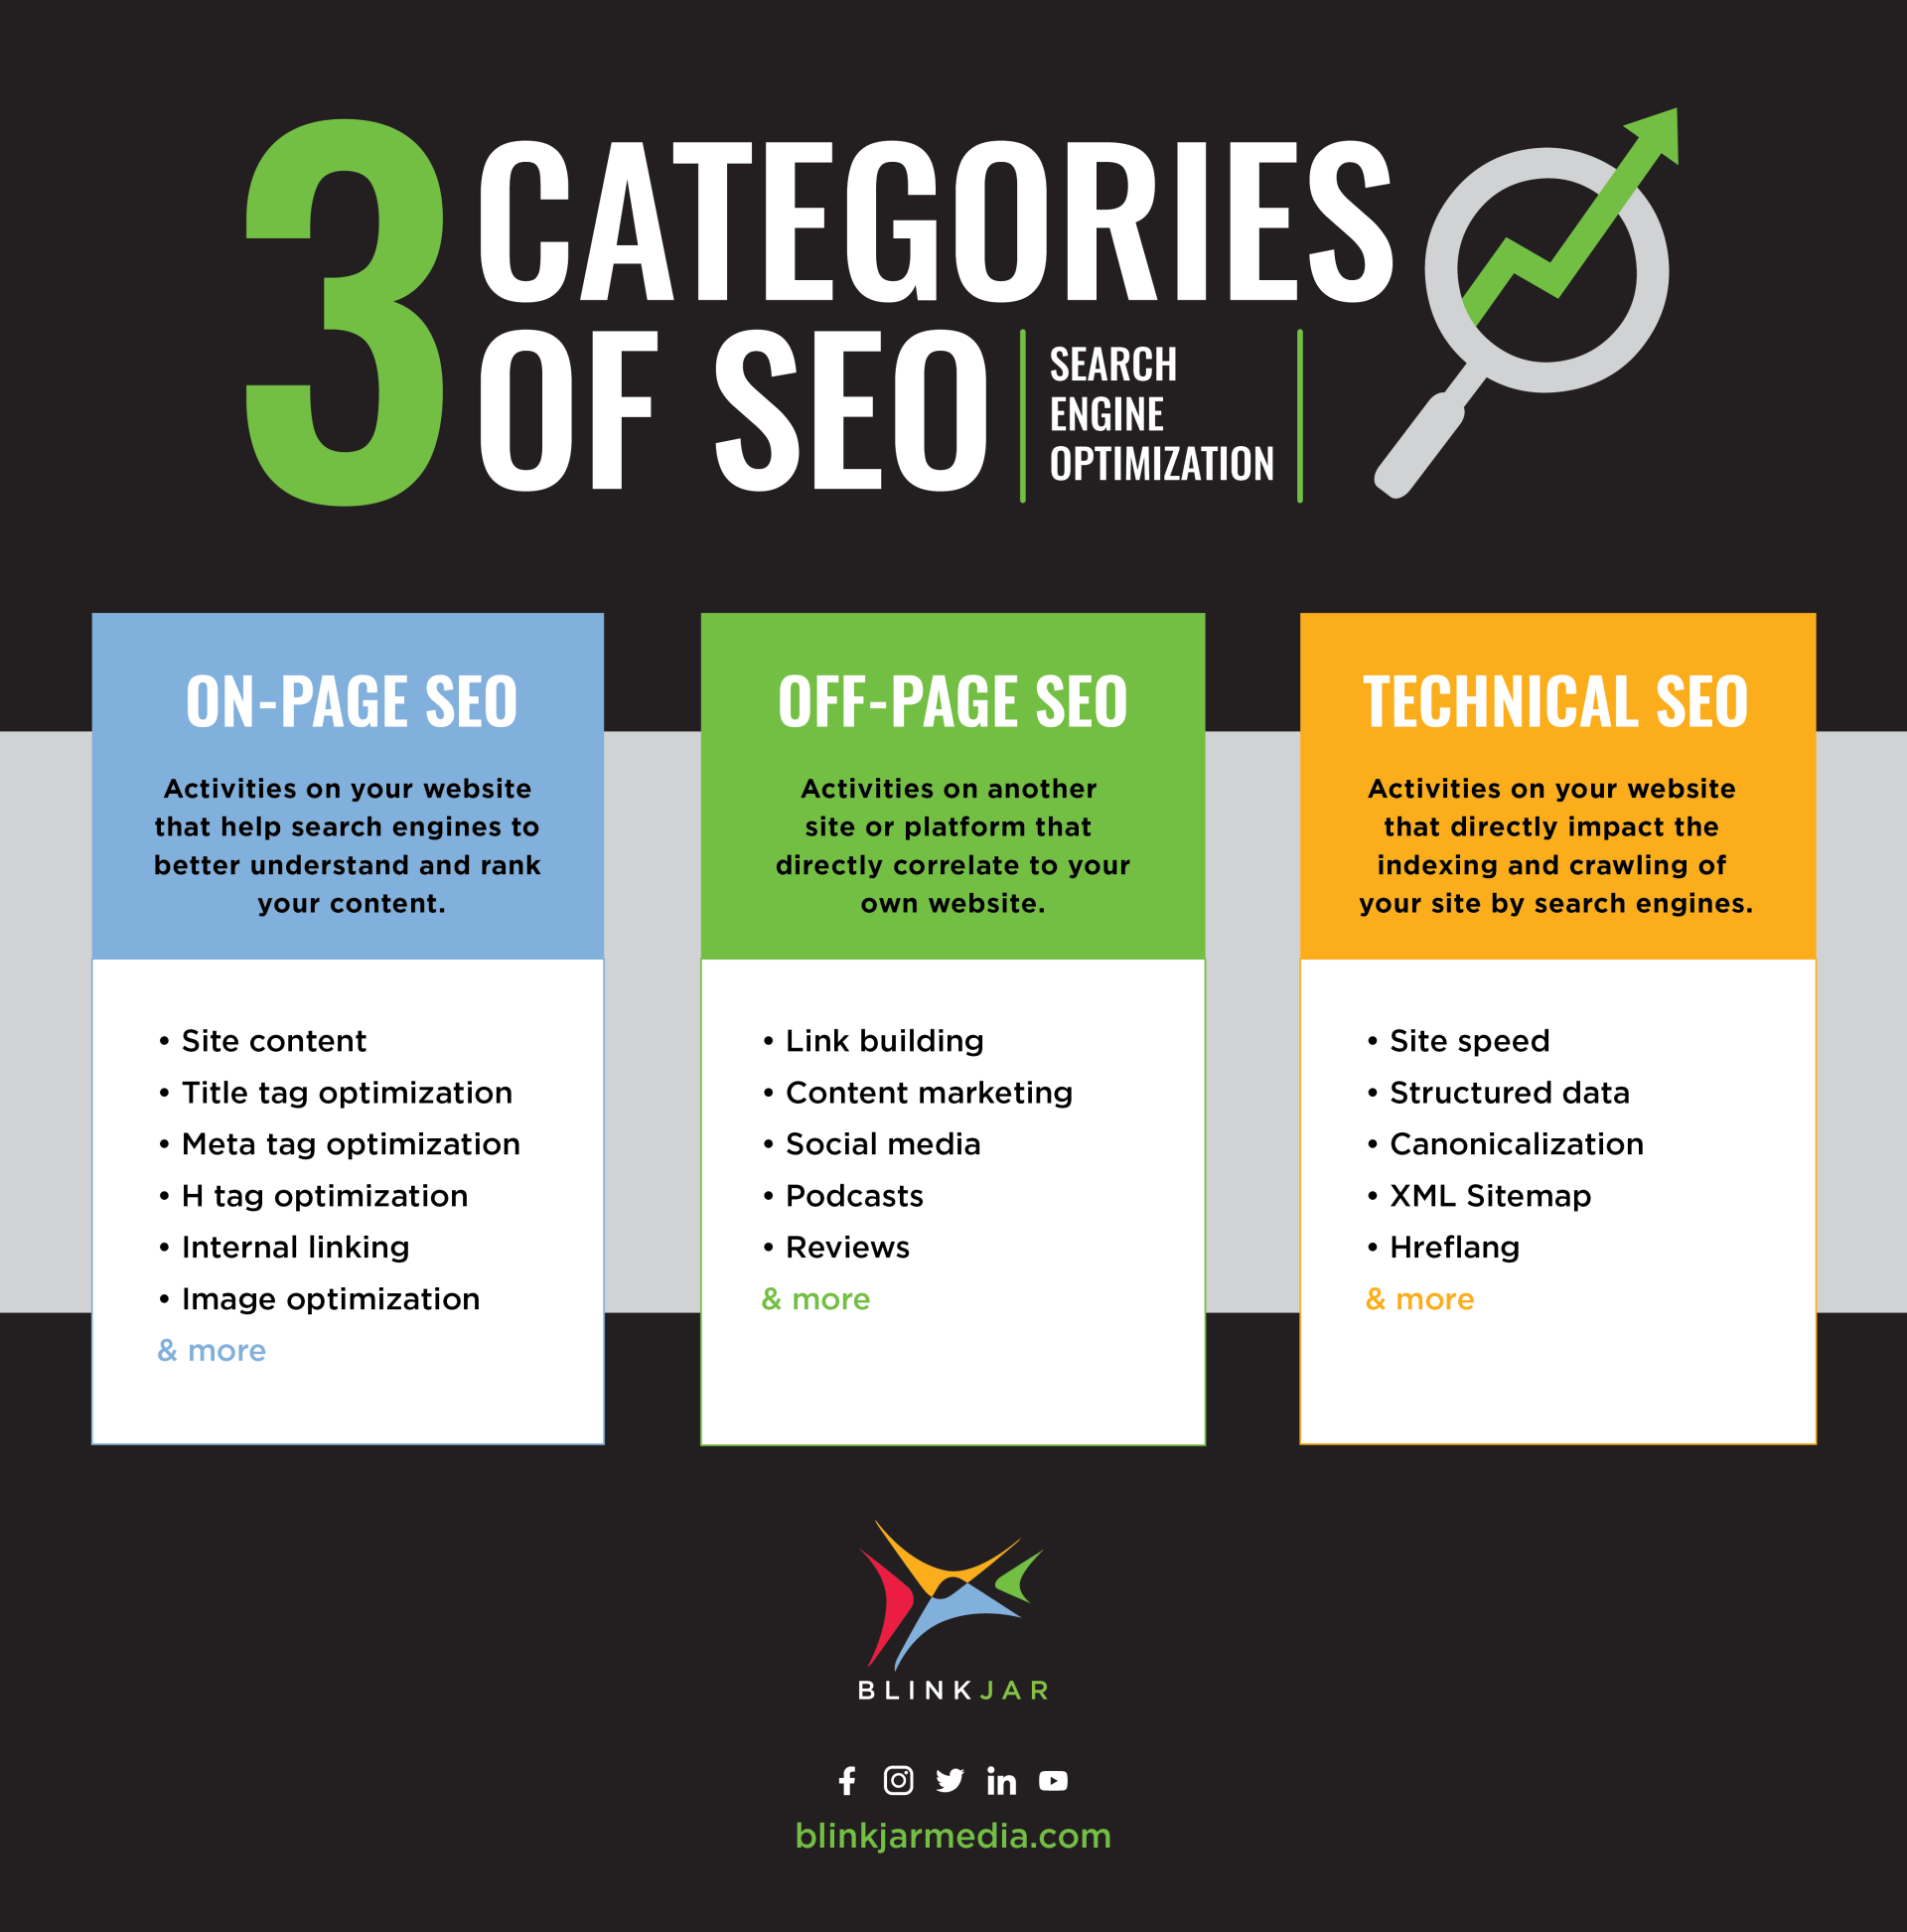 3 categories of SEO